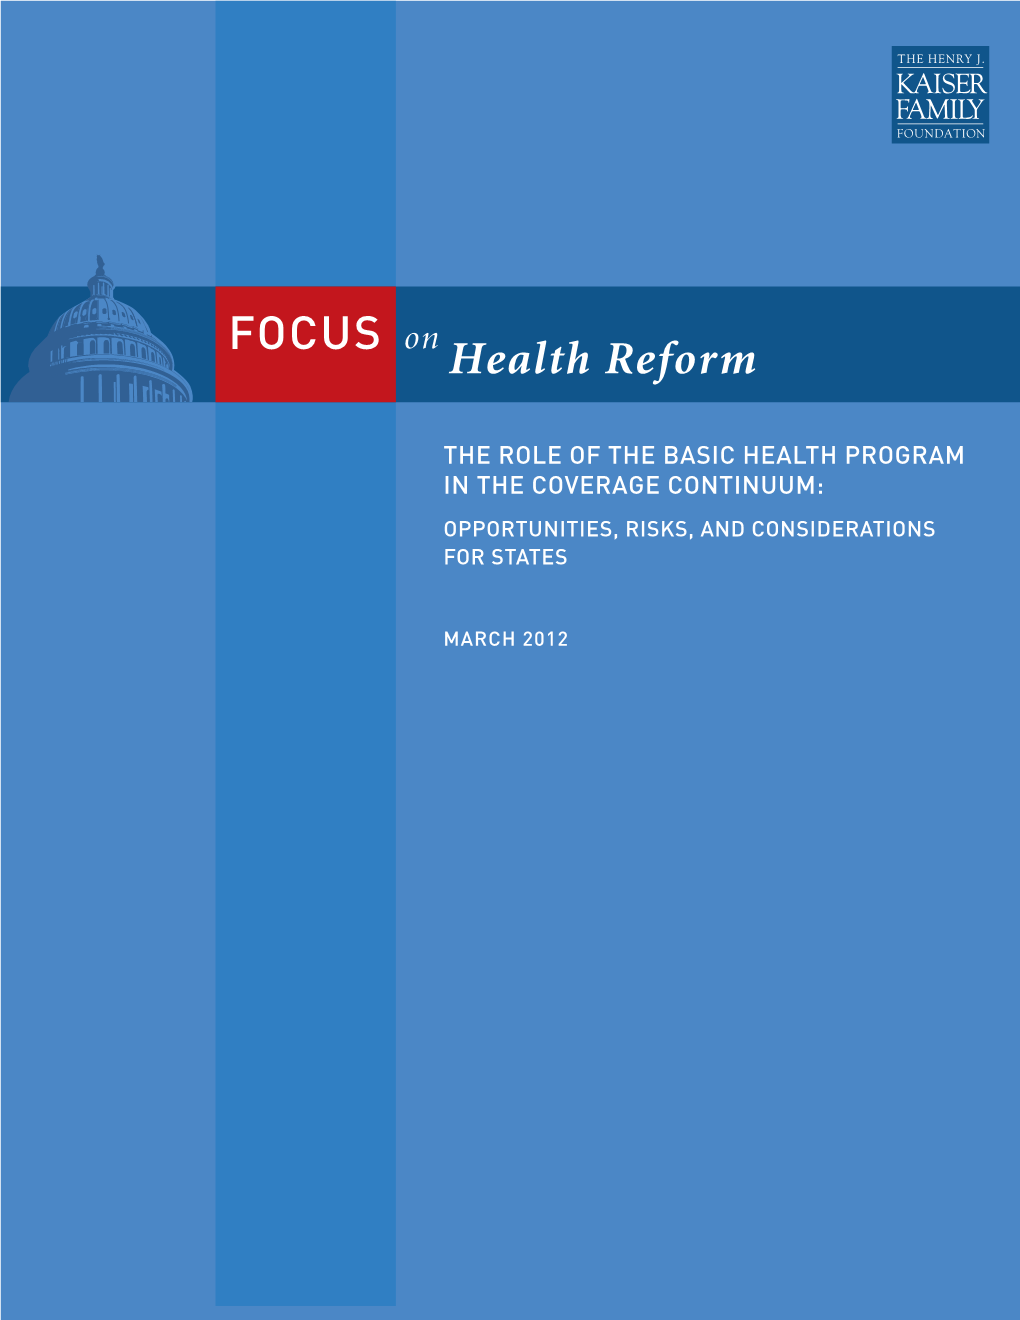 The Role of the Basic Health Program in the Coverage Continuum: Opportunities, Risks, and Considerations for States